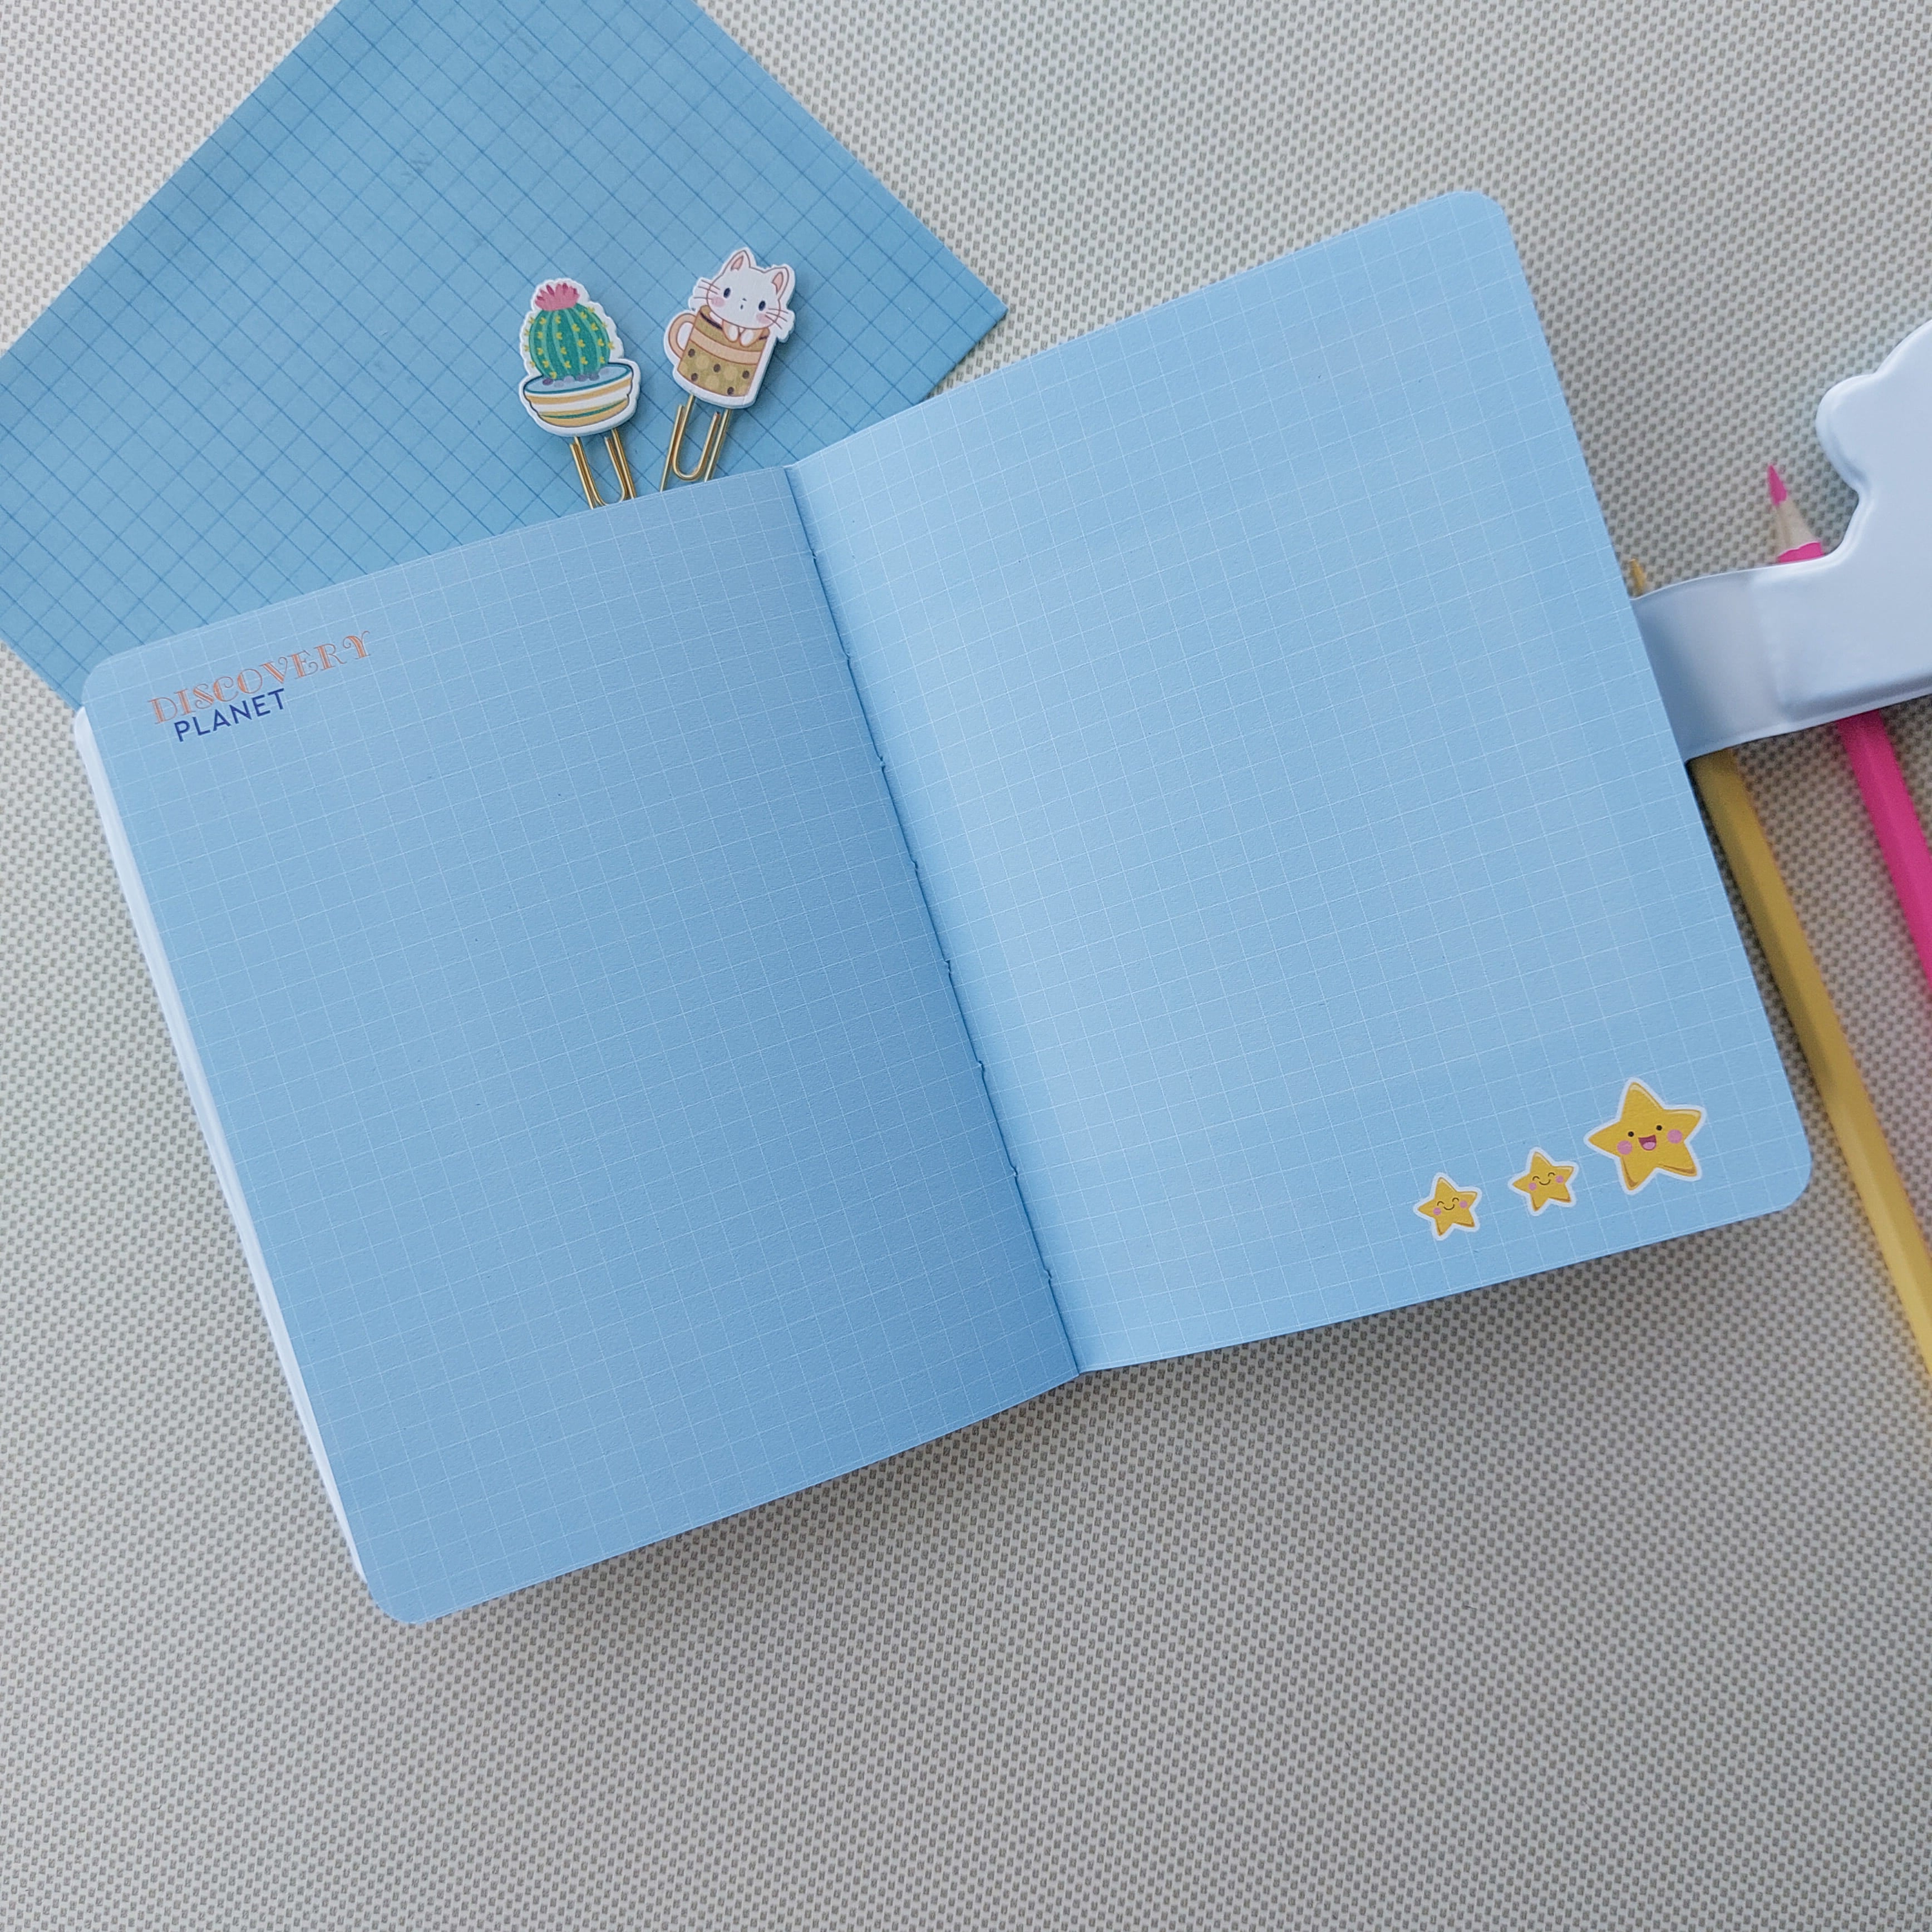 3D Magnetic Ruled Diaries